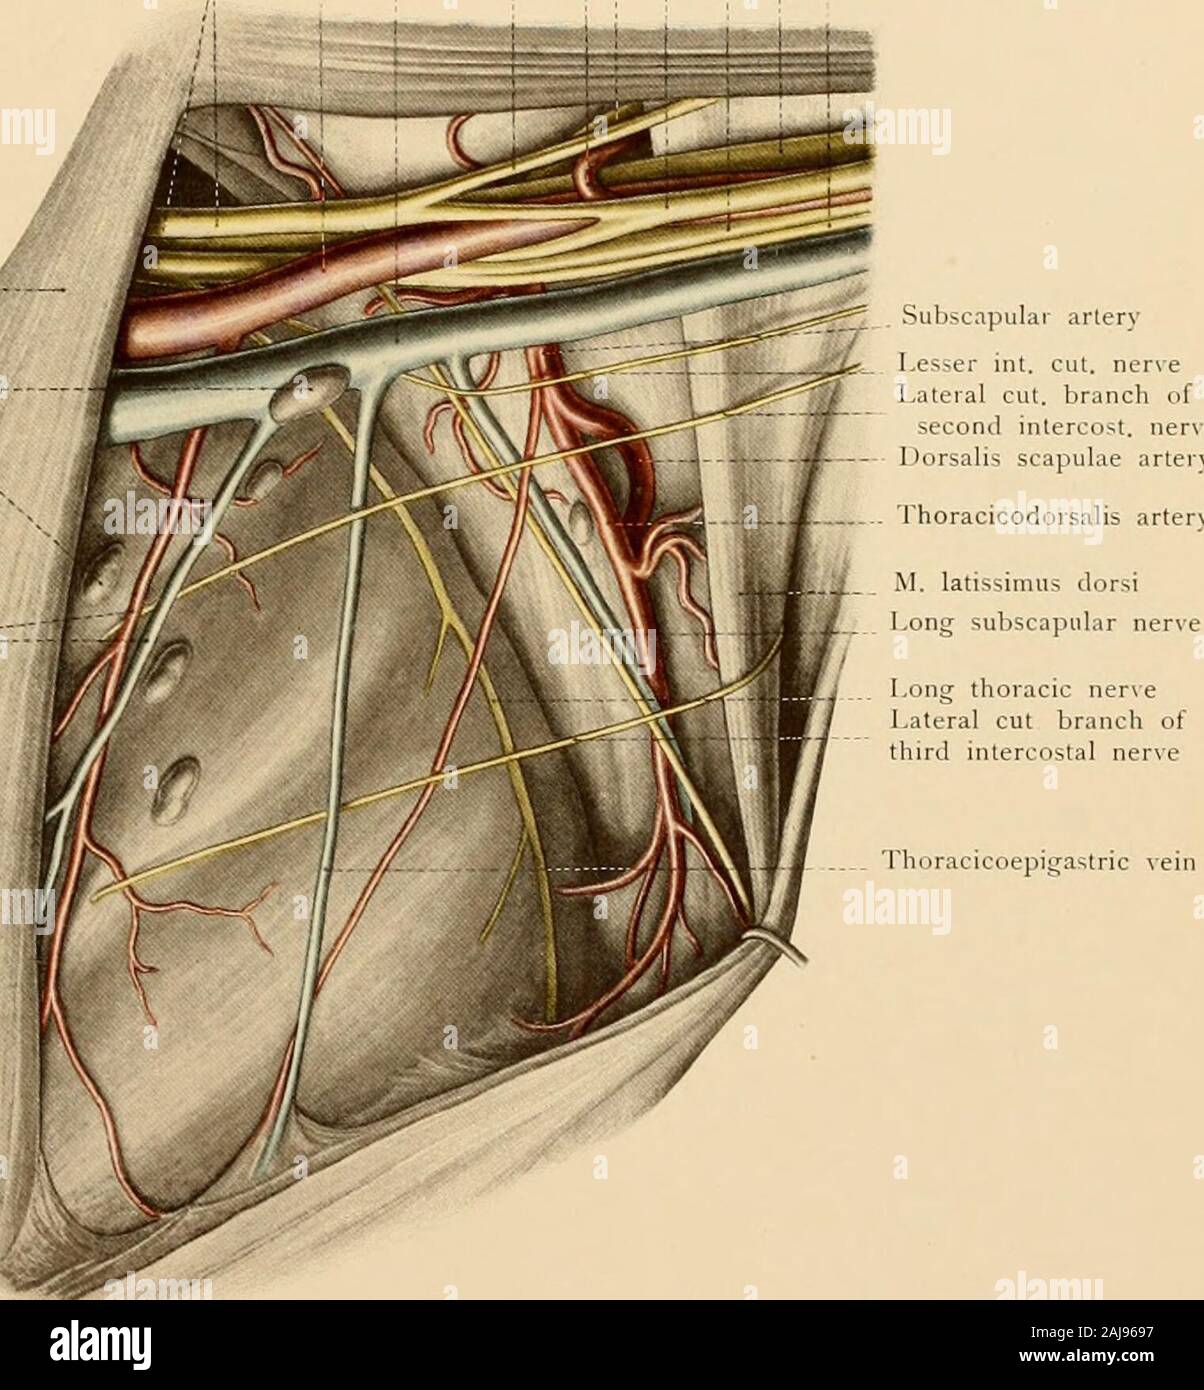 Atlas and text-book of topographic and applied anatomy . l. The subscapular artery divides into two chiefbranches, the dorsalis scapulae and the thoracicodorsalis [the continuation of the subscapular].The dorsalis scapula: runs over the external border of the scapula to the dorsal surface of this bone,supplies the surrounding muscles, and anastomoses freely with the suprascapular branch of thesubclavian. This is the main path for the collateral circulation when the blood-current in theaxillary artery is interfered with or when this vessel is ligated. The thoracicodorsalis is the largestvessel Stock Photo